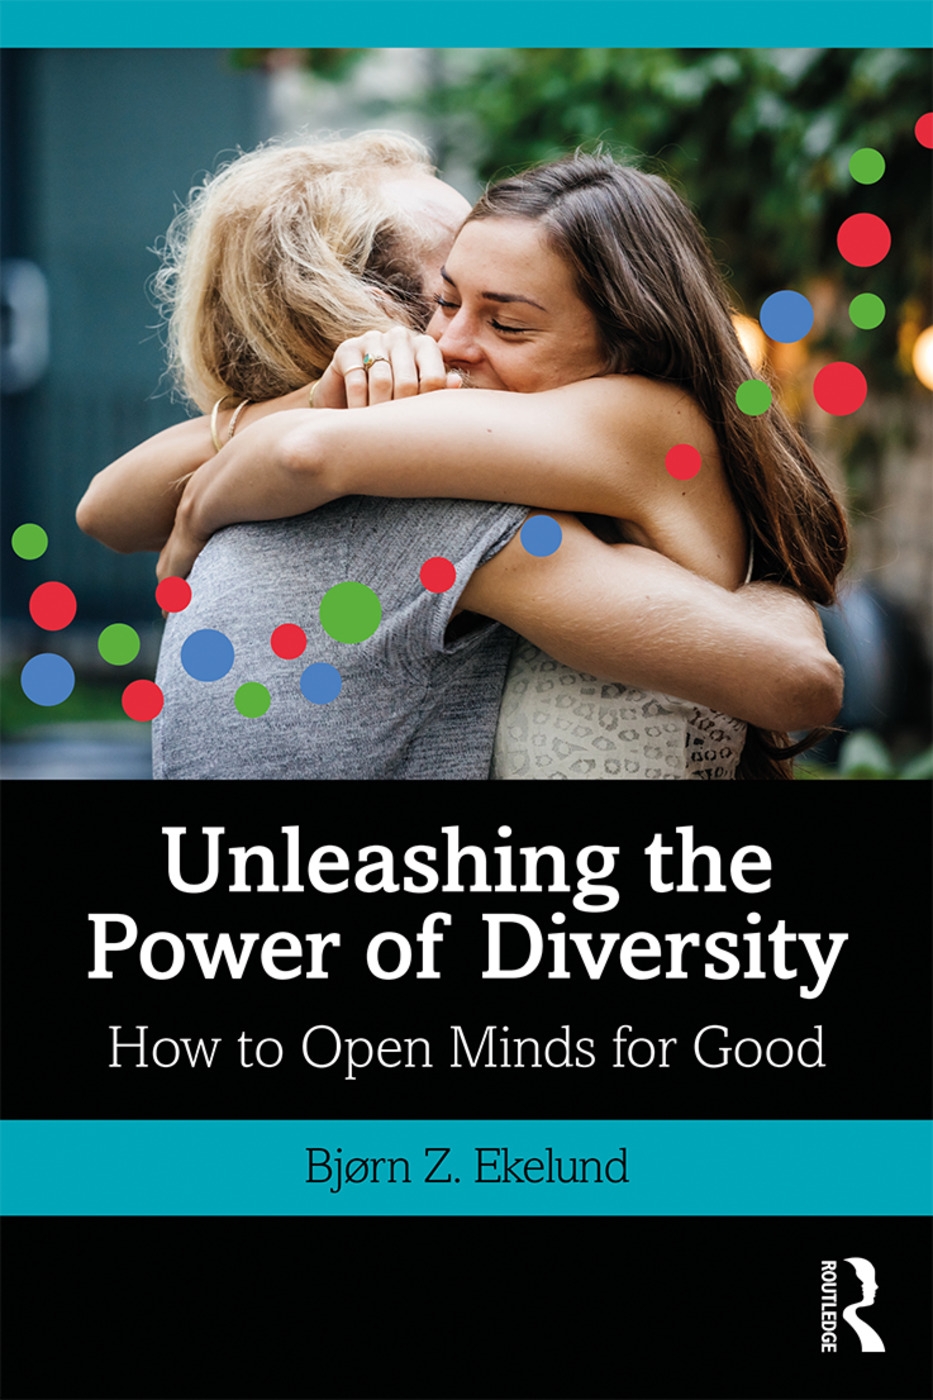 Unleashing the Power of Diversity: How to Open Minds for Good